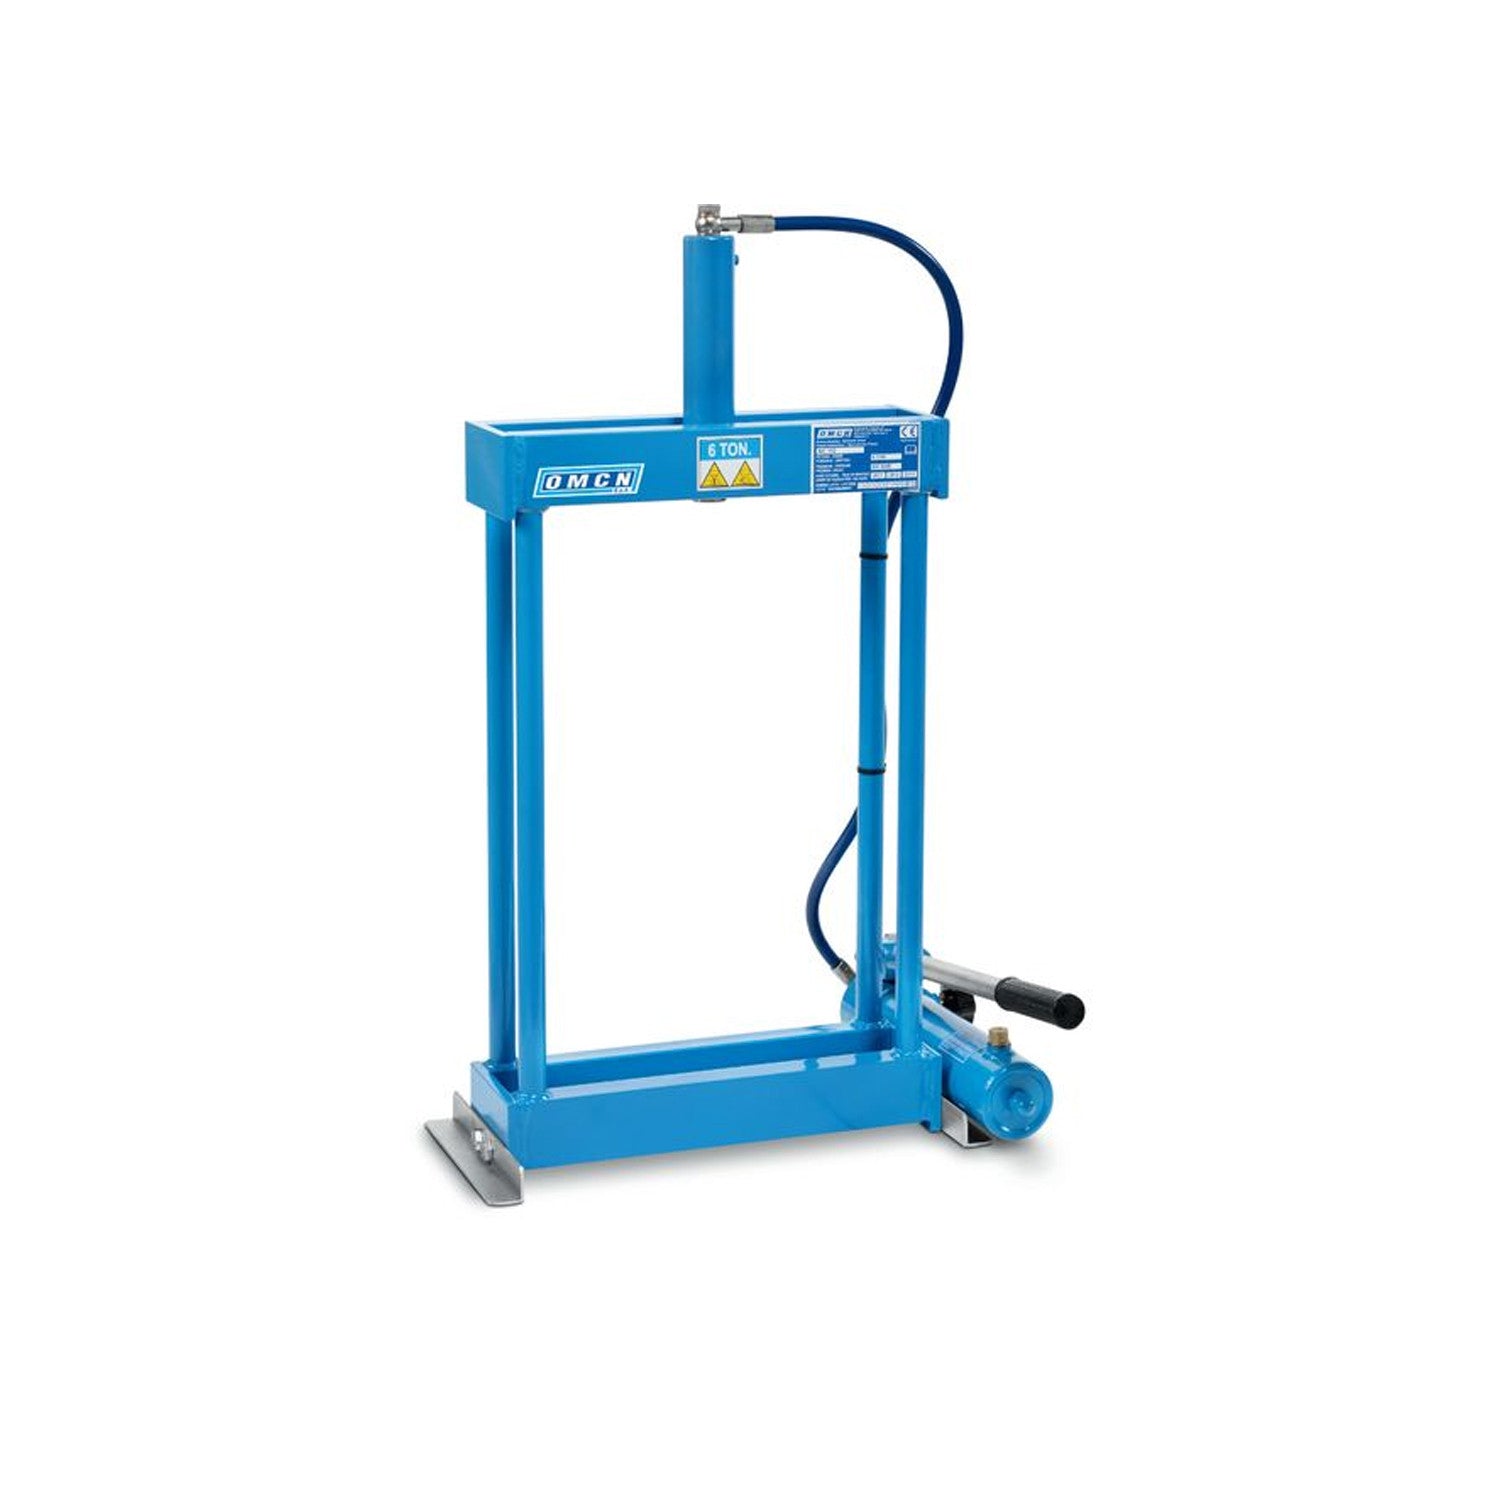 Hydraulic bench press with 1-speed hand pump capacity 6t OMCN 152